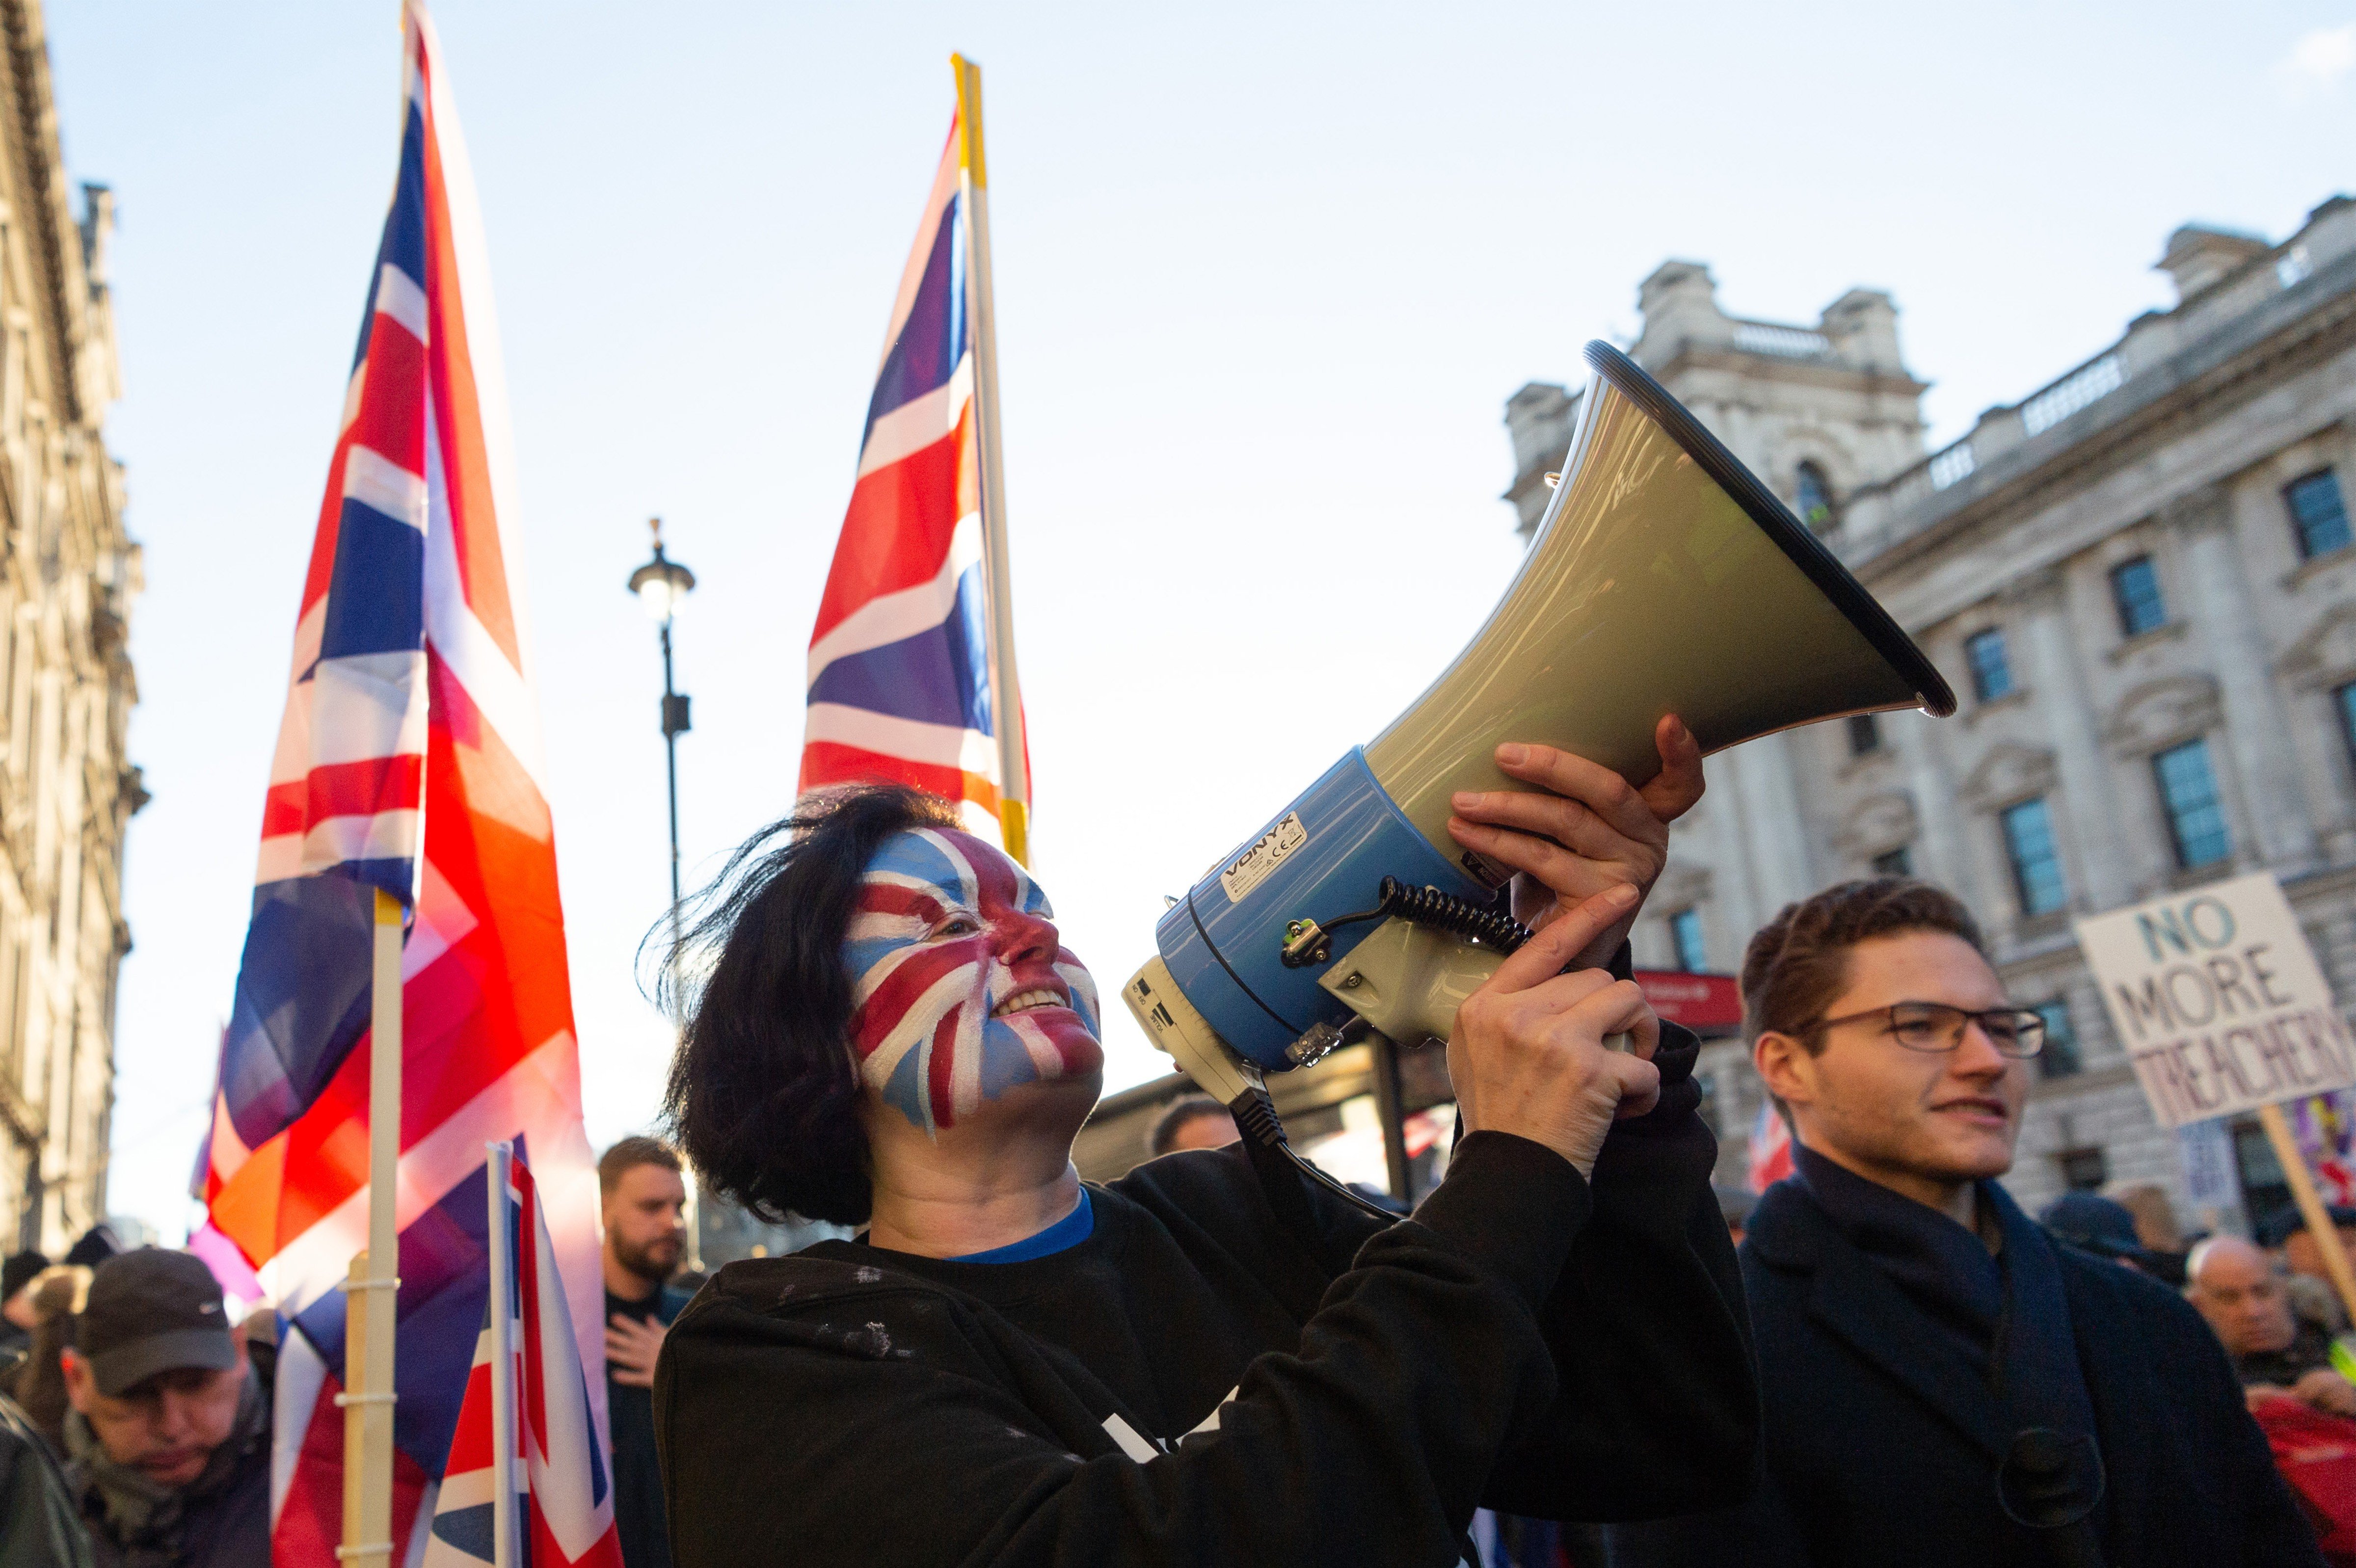 Brexit supporters take part in the “Brexit Betrayal Rally” in London on December 9. Photo: Xinhua